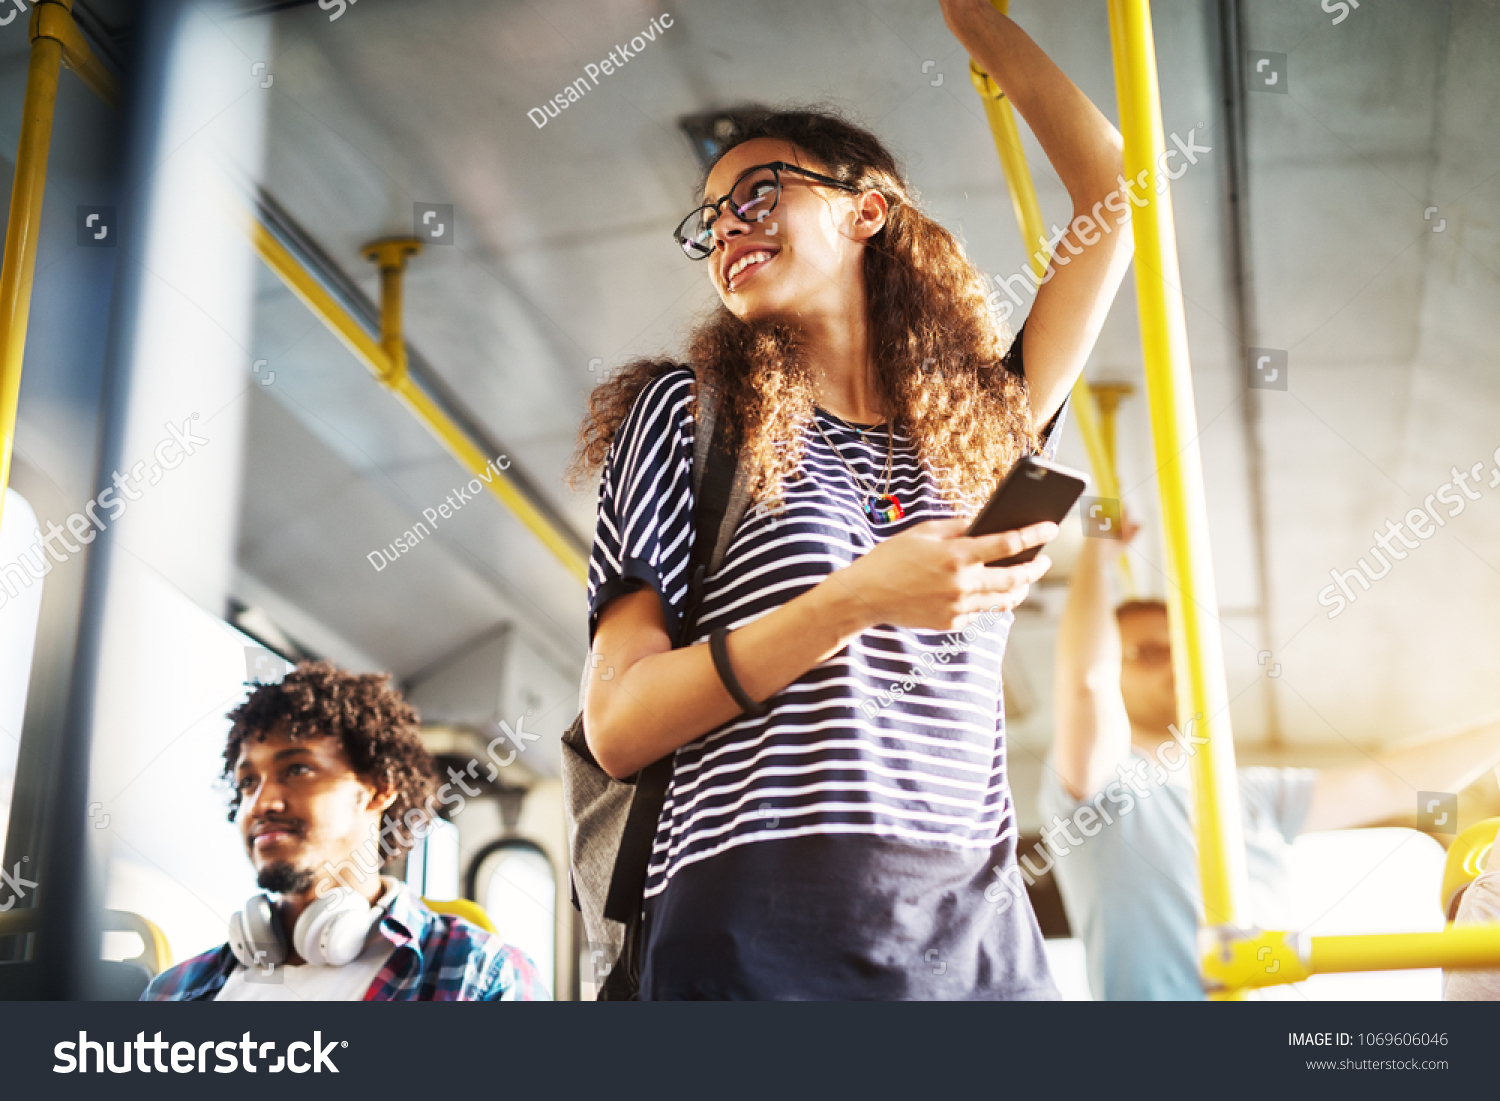 Young adorable joyful woman is standing on the bus using the phone and smiling. #1069606046